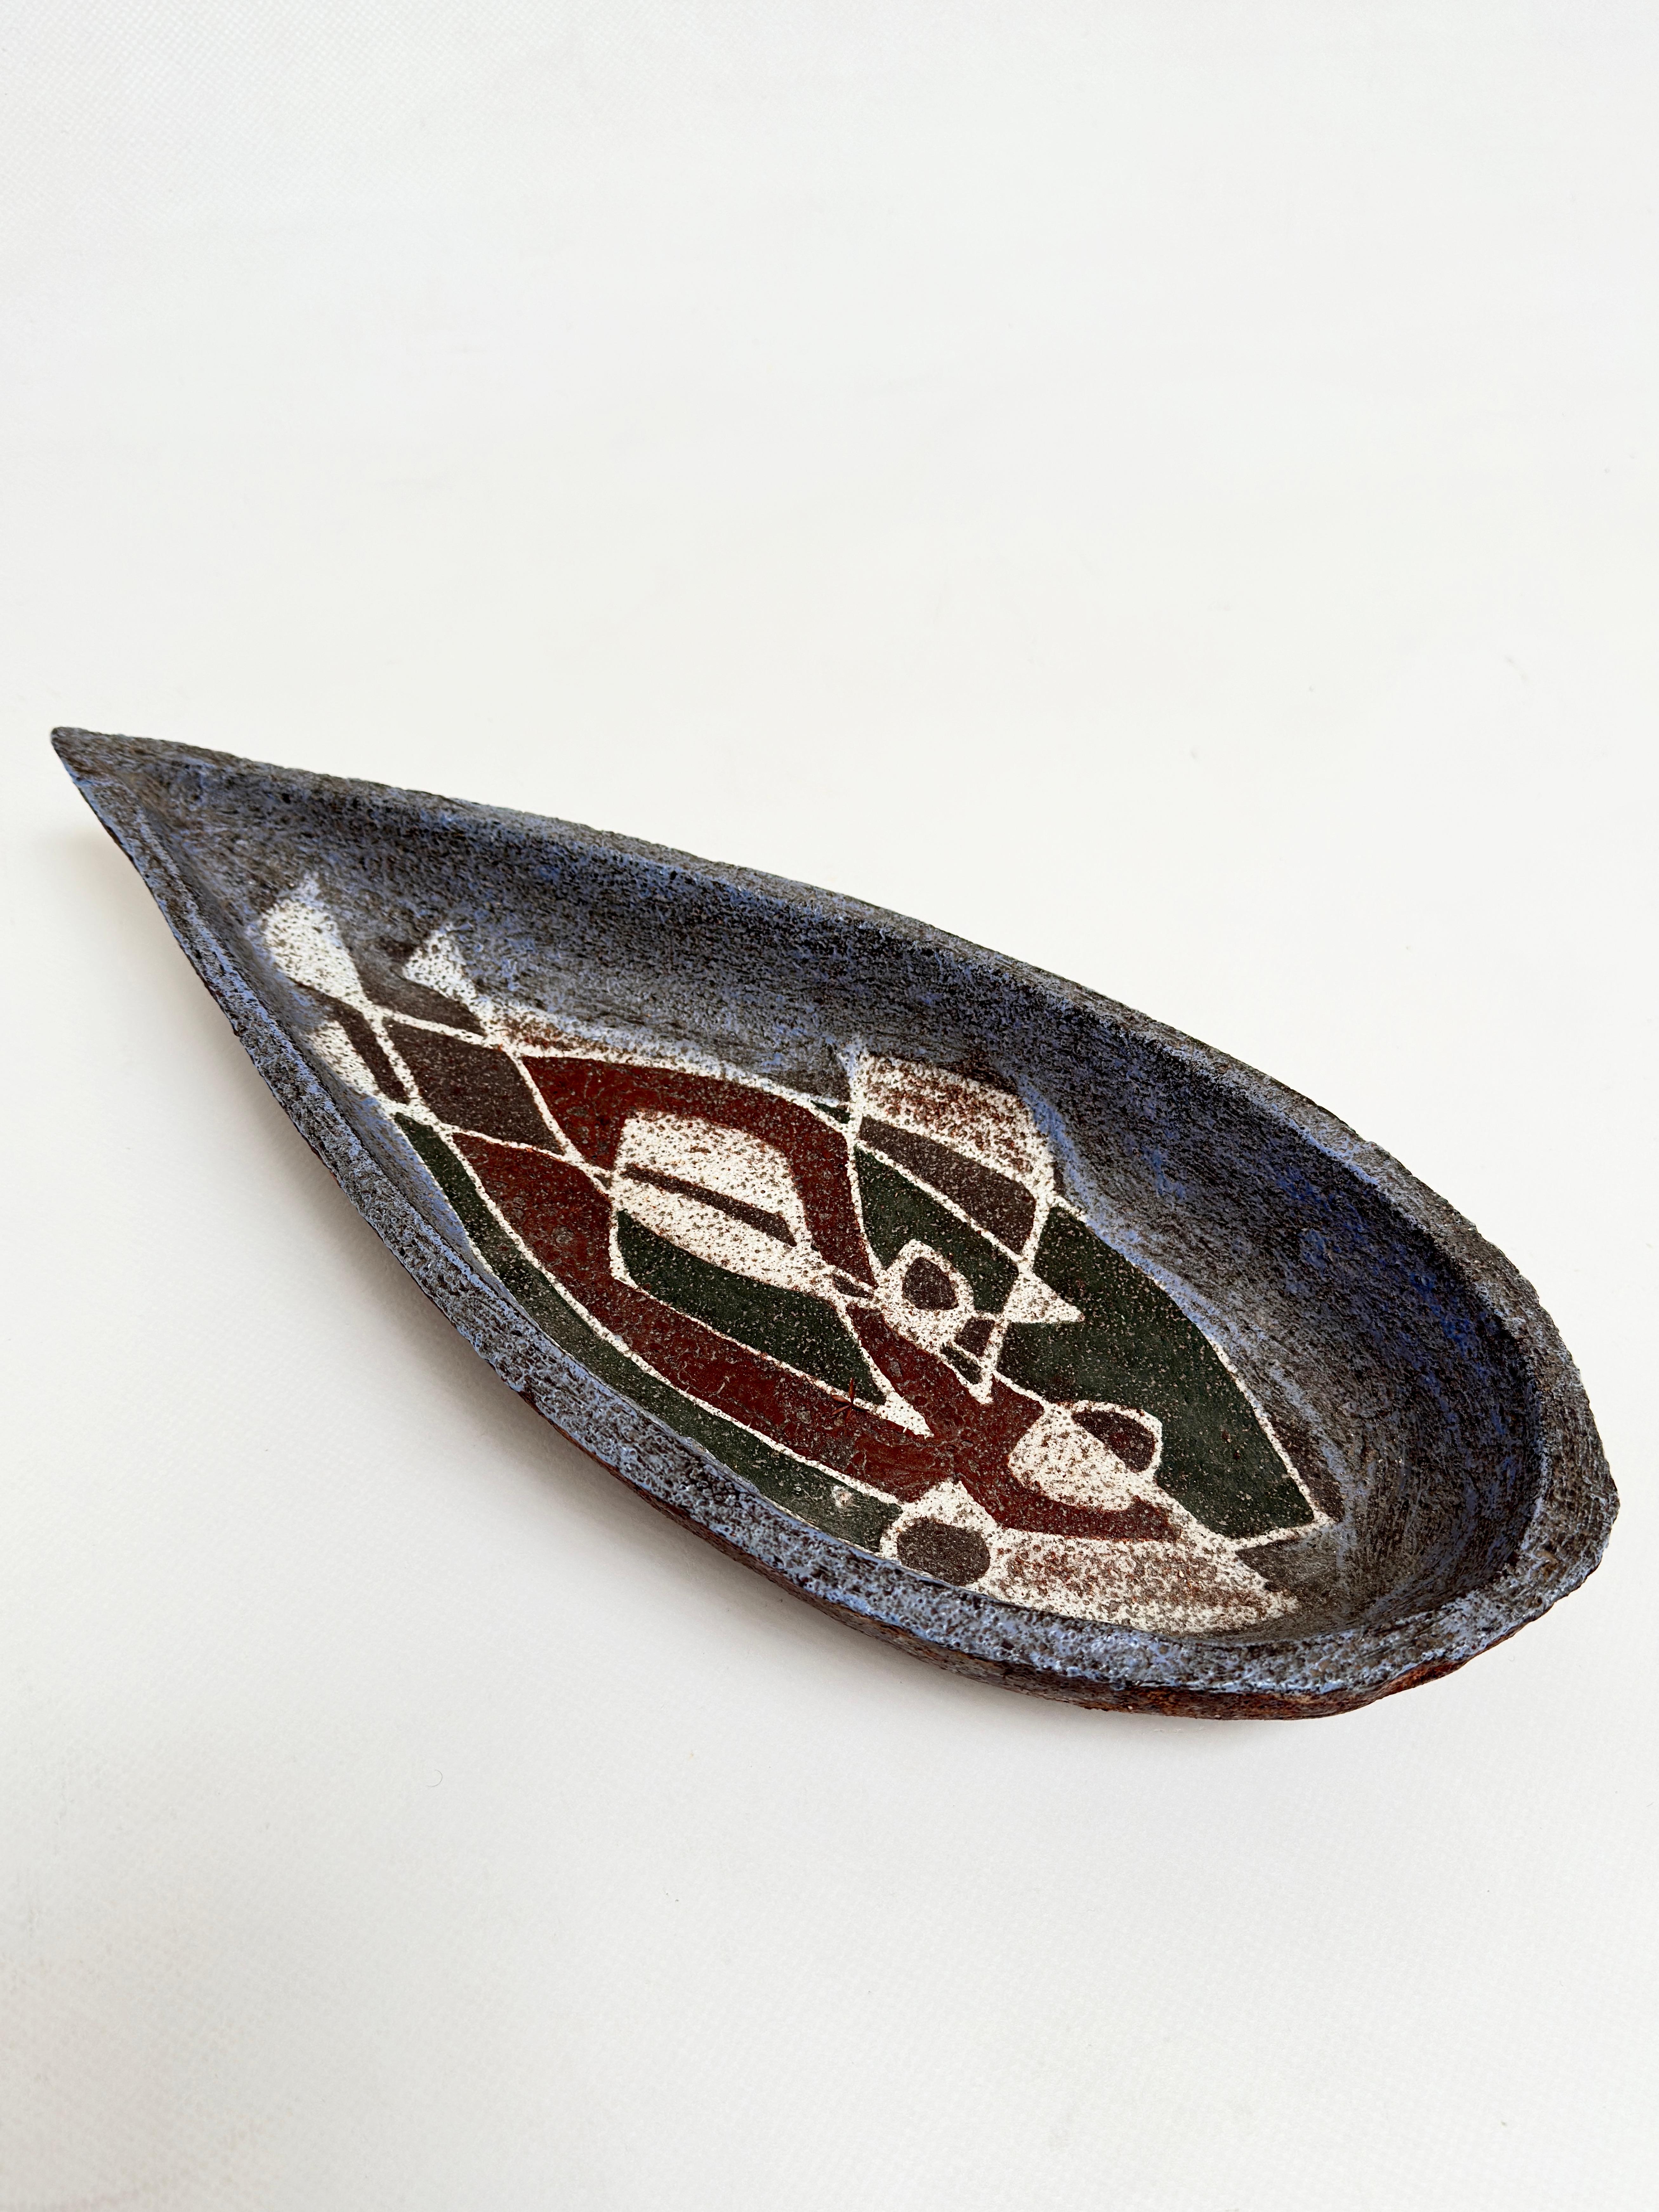 Free-form dish executed in high textured clay with stylized patterns of fish.
This piece is one of the oldest productions of Accolay.

The condition is excellent.

Handwritten mention of the workshop on the back with the 2 intertwined A.

We offer a